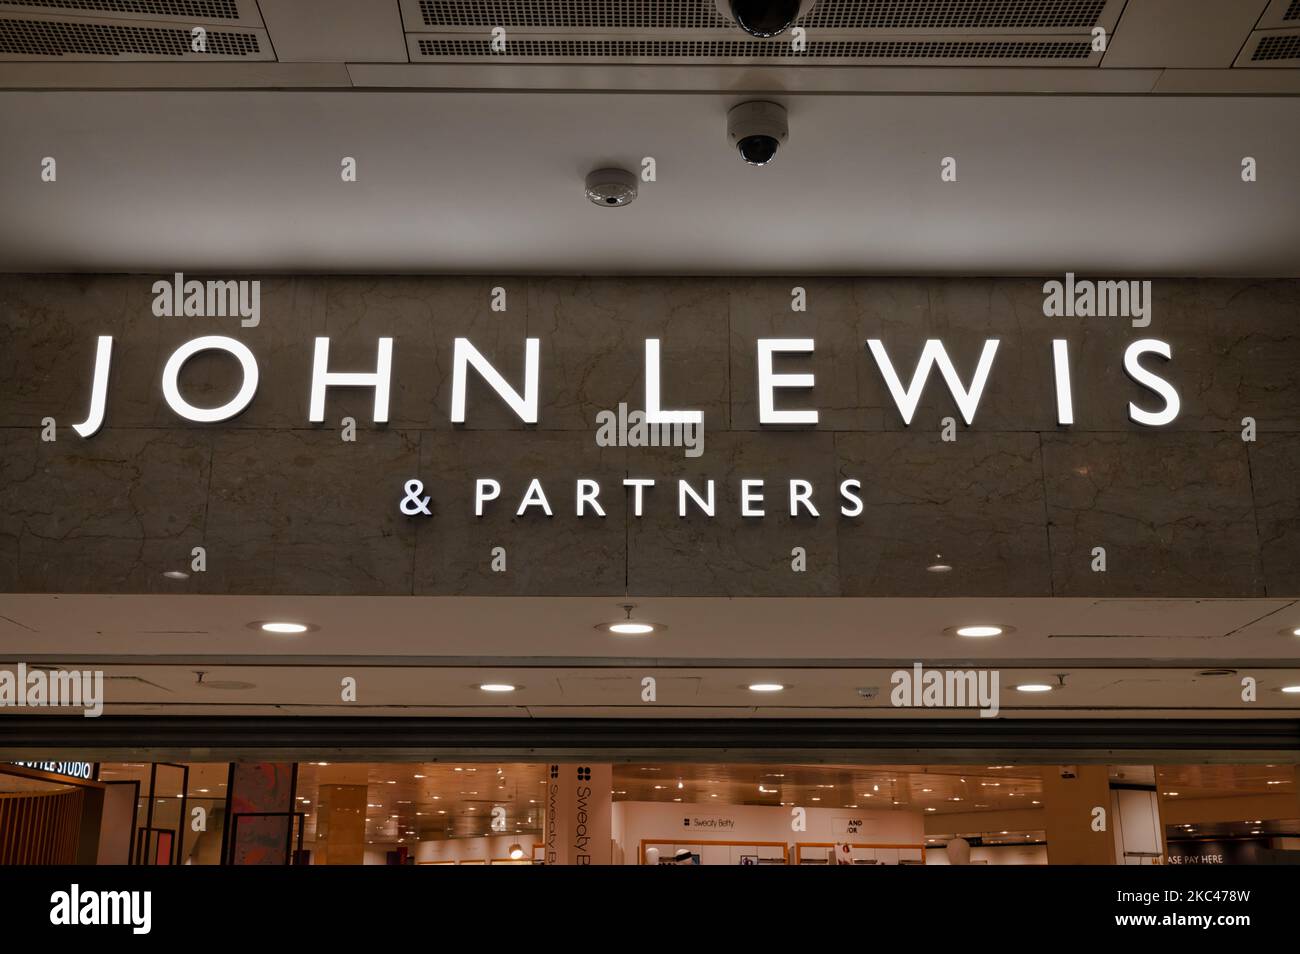 Glasgow, UK- Sept 10, 2022: The sign for John Lewis store in downtown Glasgow, Scotland Stock Photo